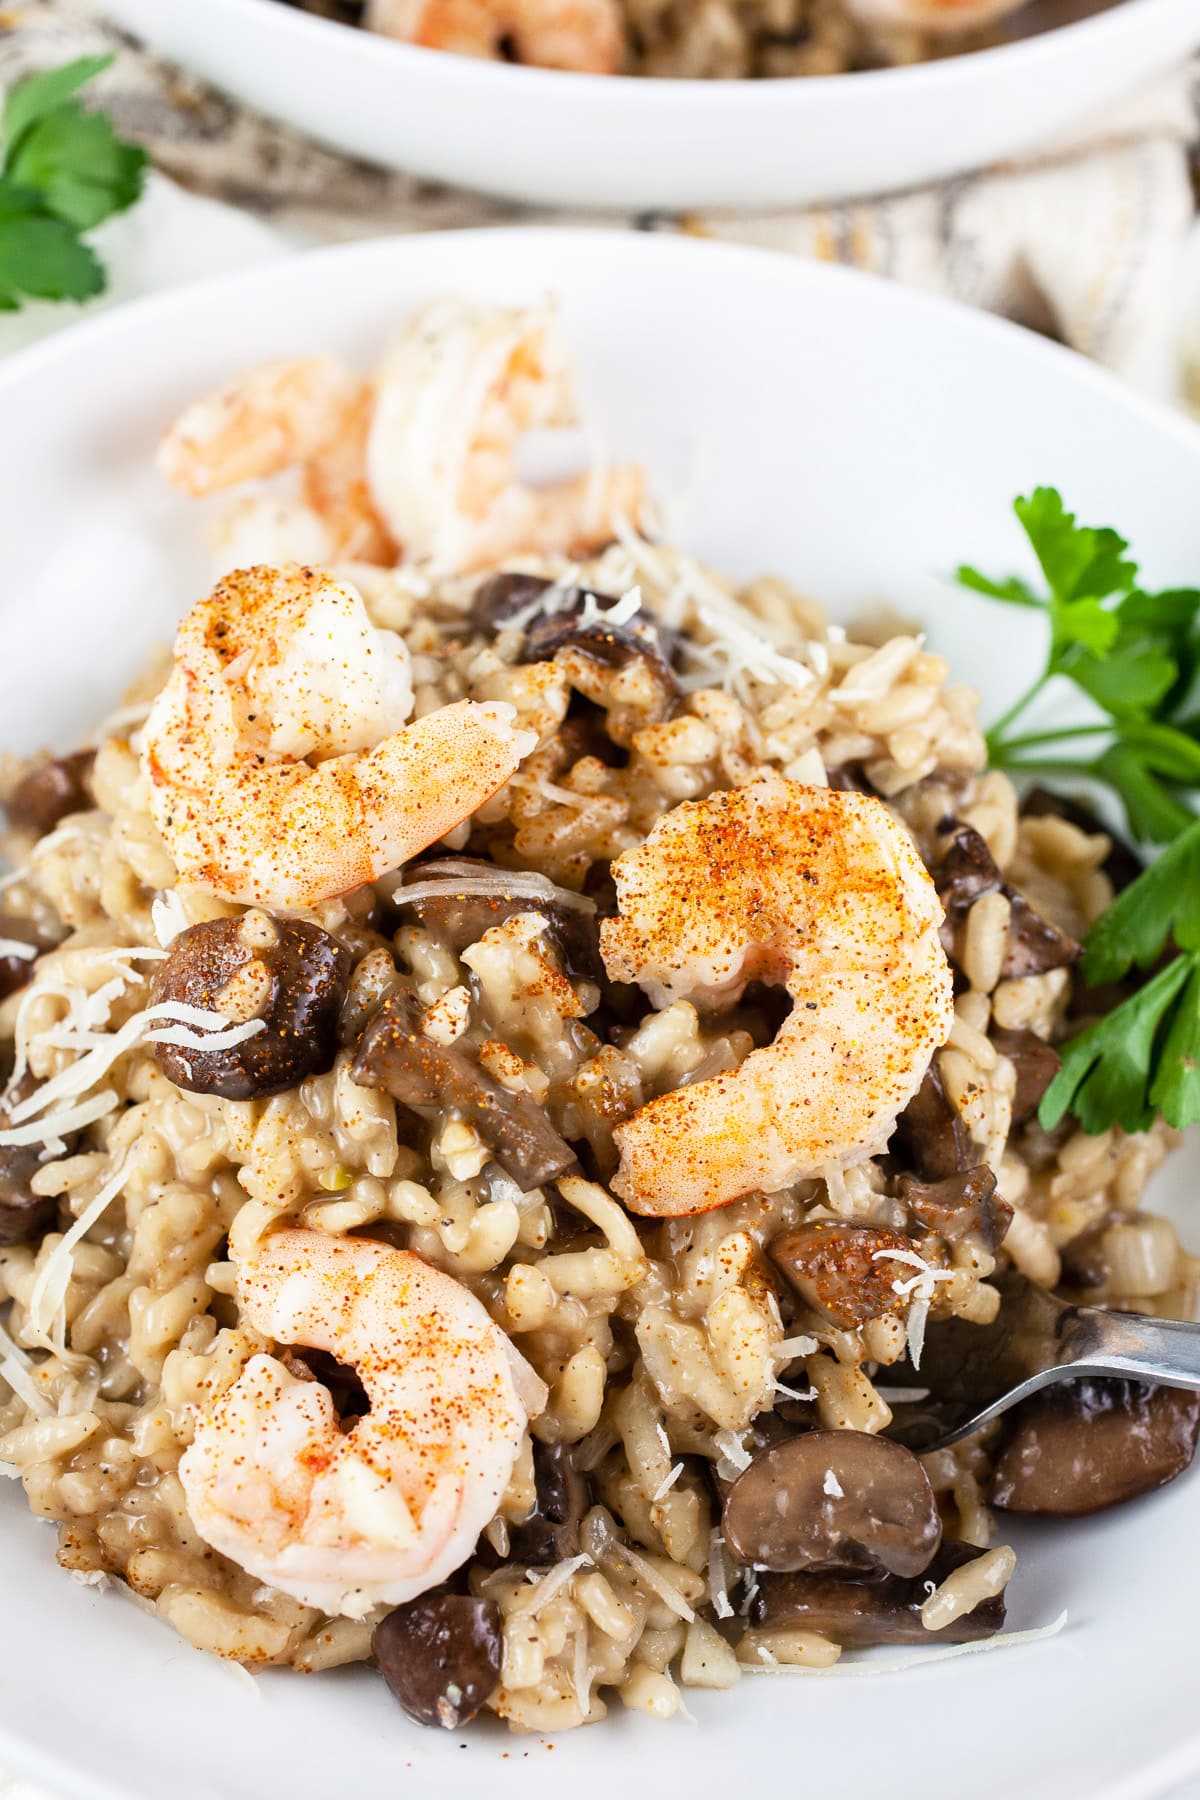 Mushroom shrimp risotto with parsley in white bowls.